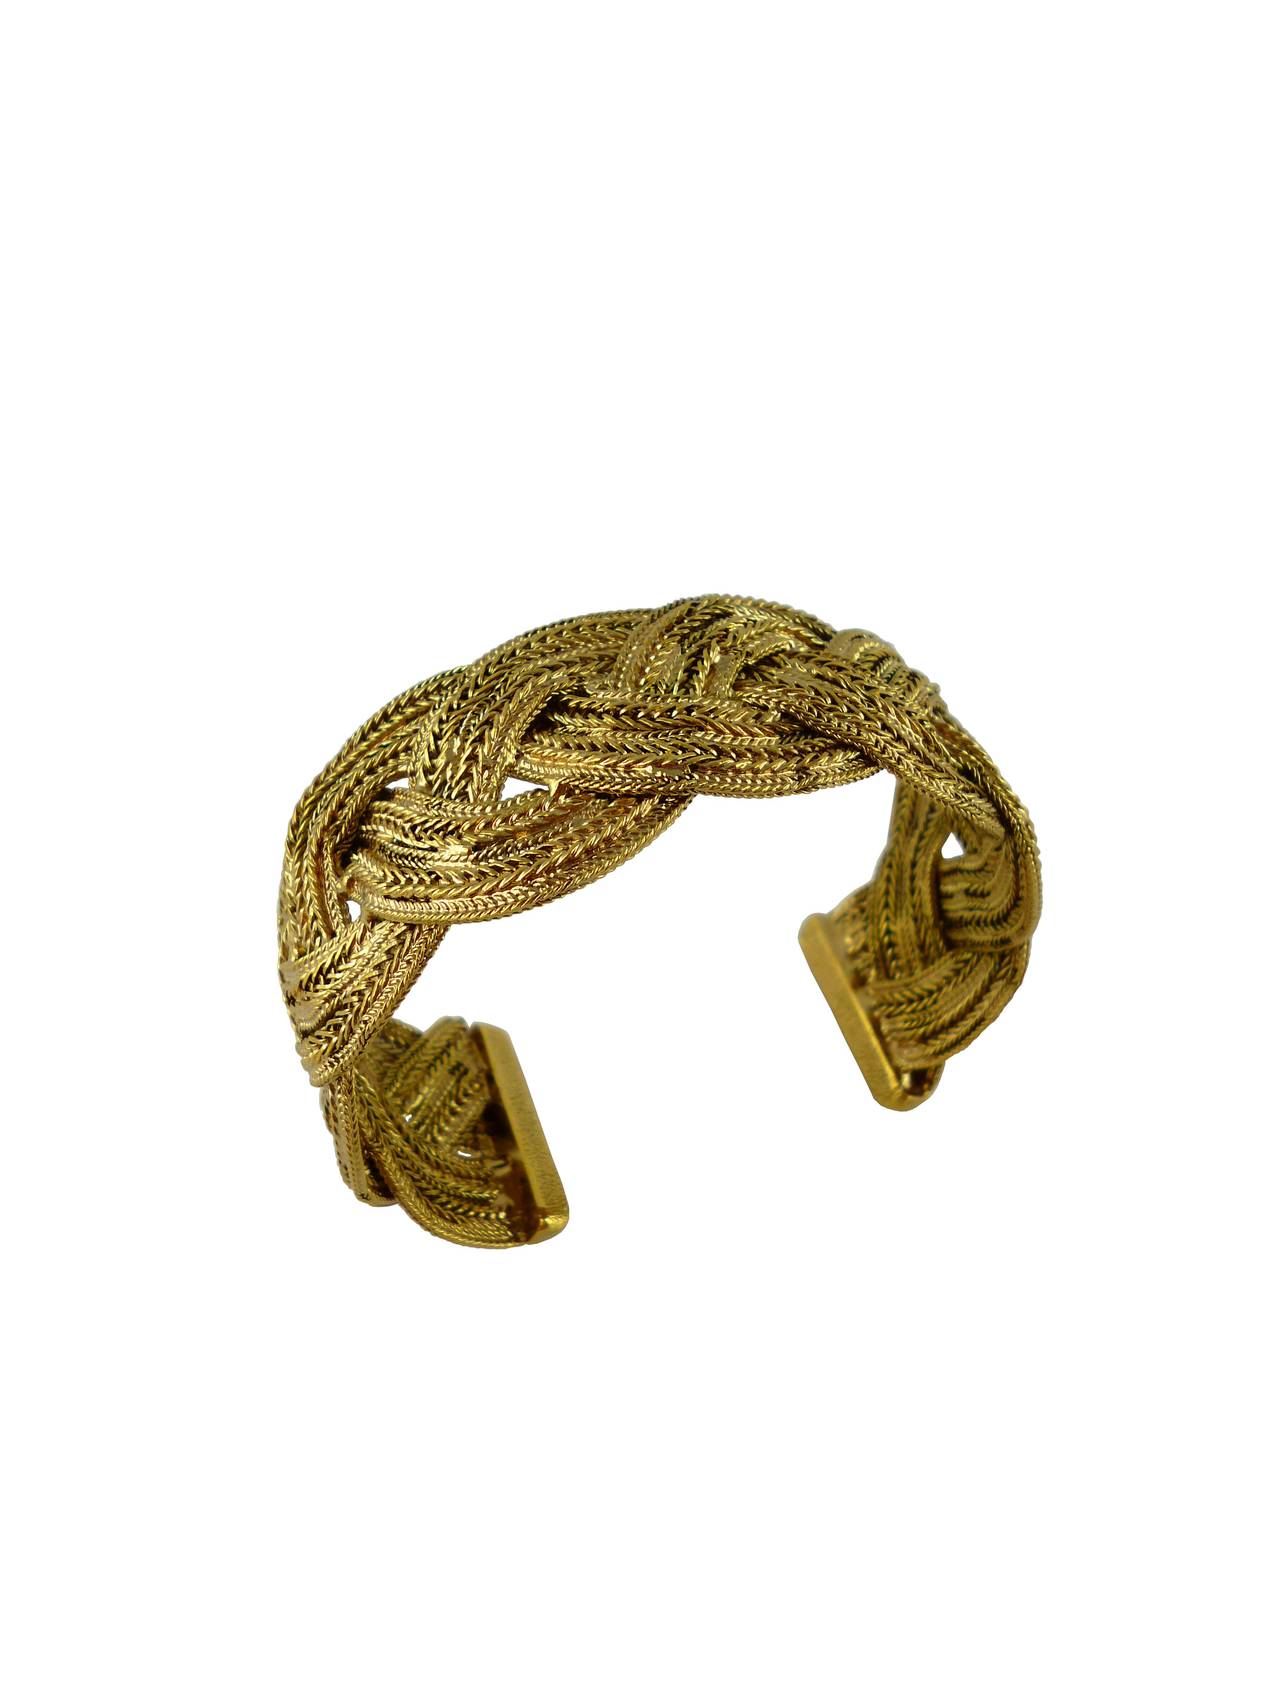 CHANEL semi rigid braided cuff bracelet featuring intertwined gold toned chains with antique patina.

Embossed CHANEL.

Indicative measurements : inner circumference approx. 19.80 cm (7.80 inches) /  width approx. 2.8 cm (1.10 inches).

This